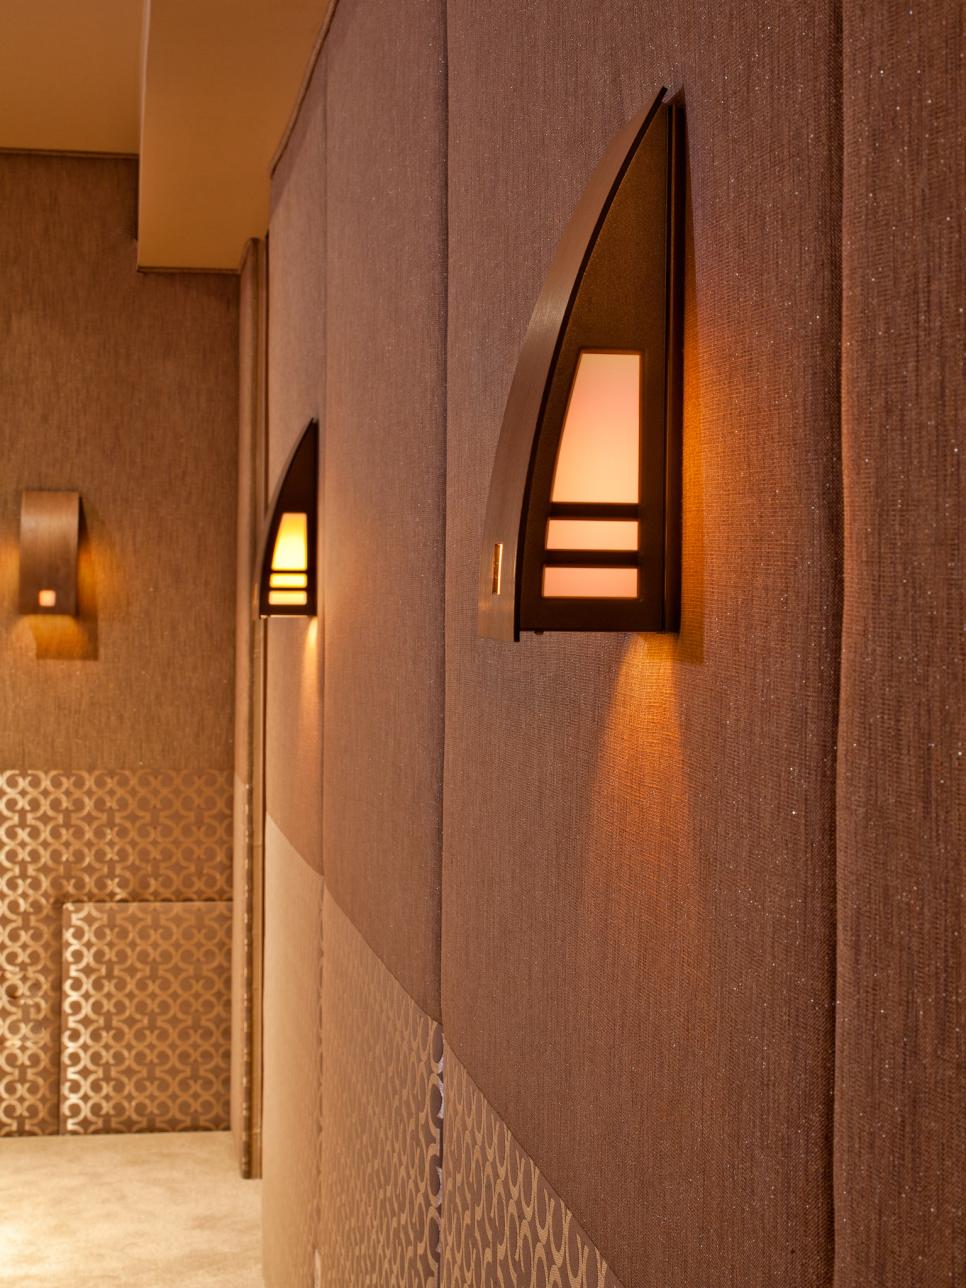 Brown Media Room With Contemporary Sconce Lights and Padded Soundproofed Walls